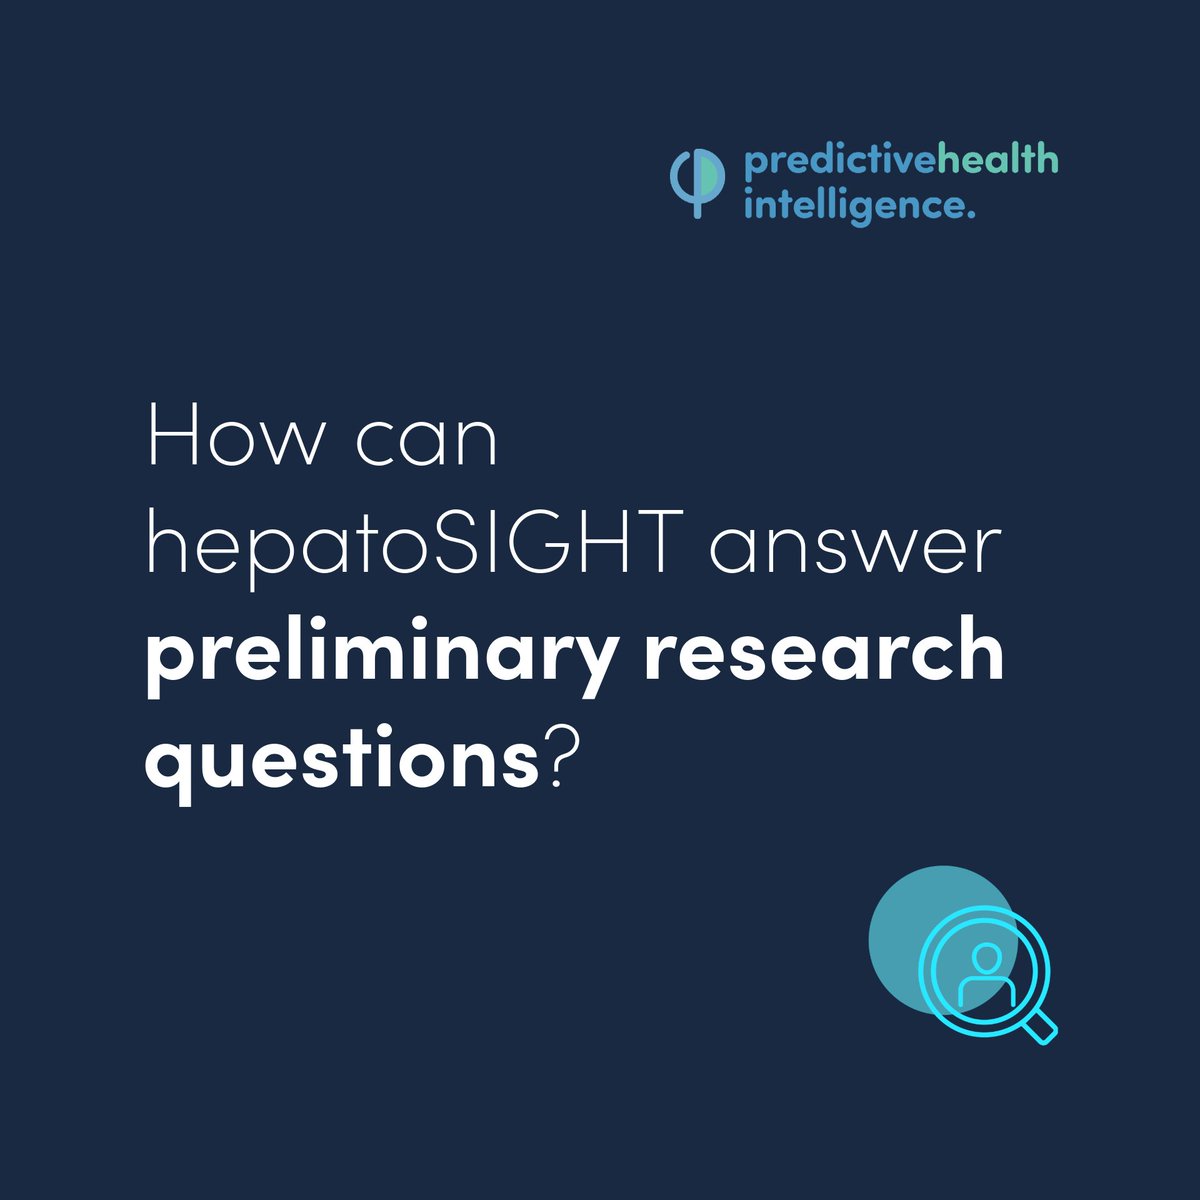 Are you a liver disease researcher looking to expedite your clinical trial?

Did you know hepatoSIGHT can help you answer preliminary research questions AND accelerate recruitment?

Learn more on our website 👇

predictivehealthintelligence.co.uk/professionals/…

#LiverTwitter #ClinicalTrials #MedTech